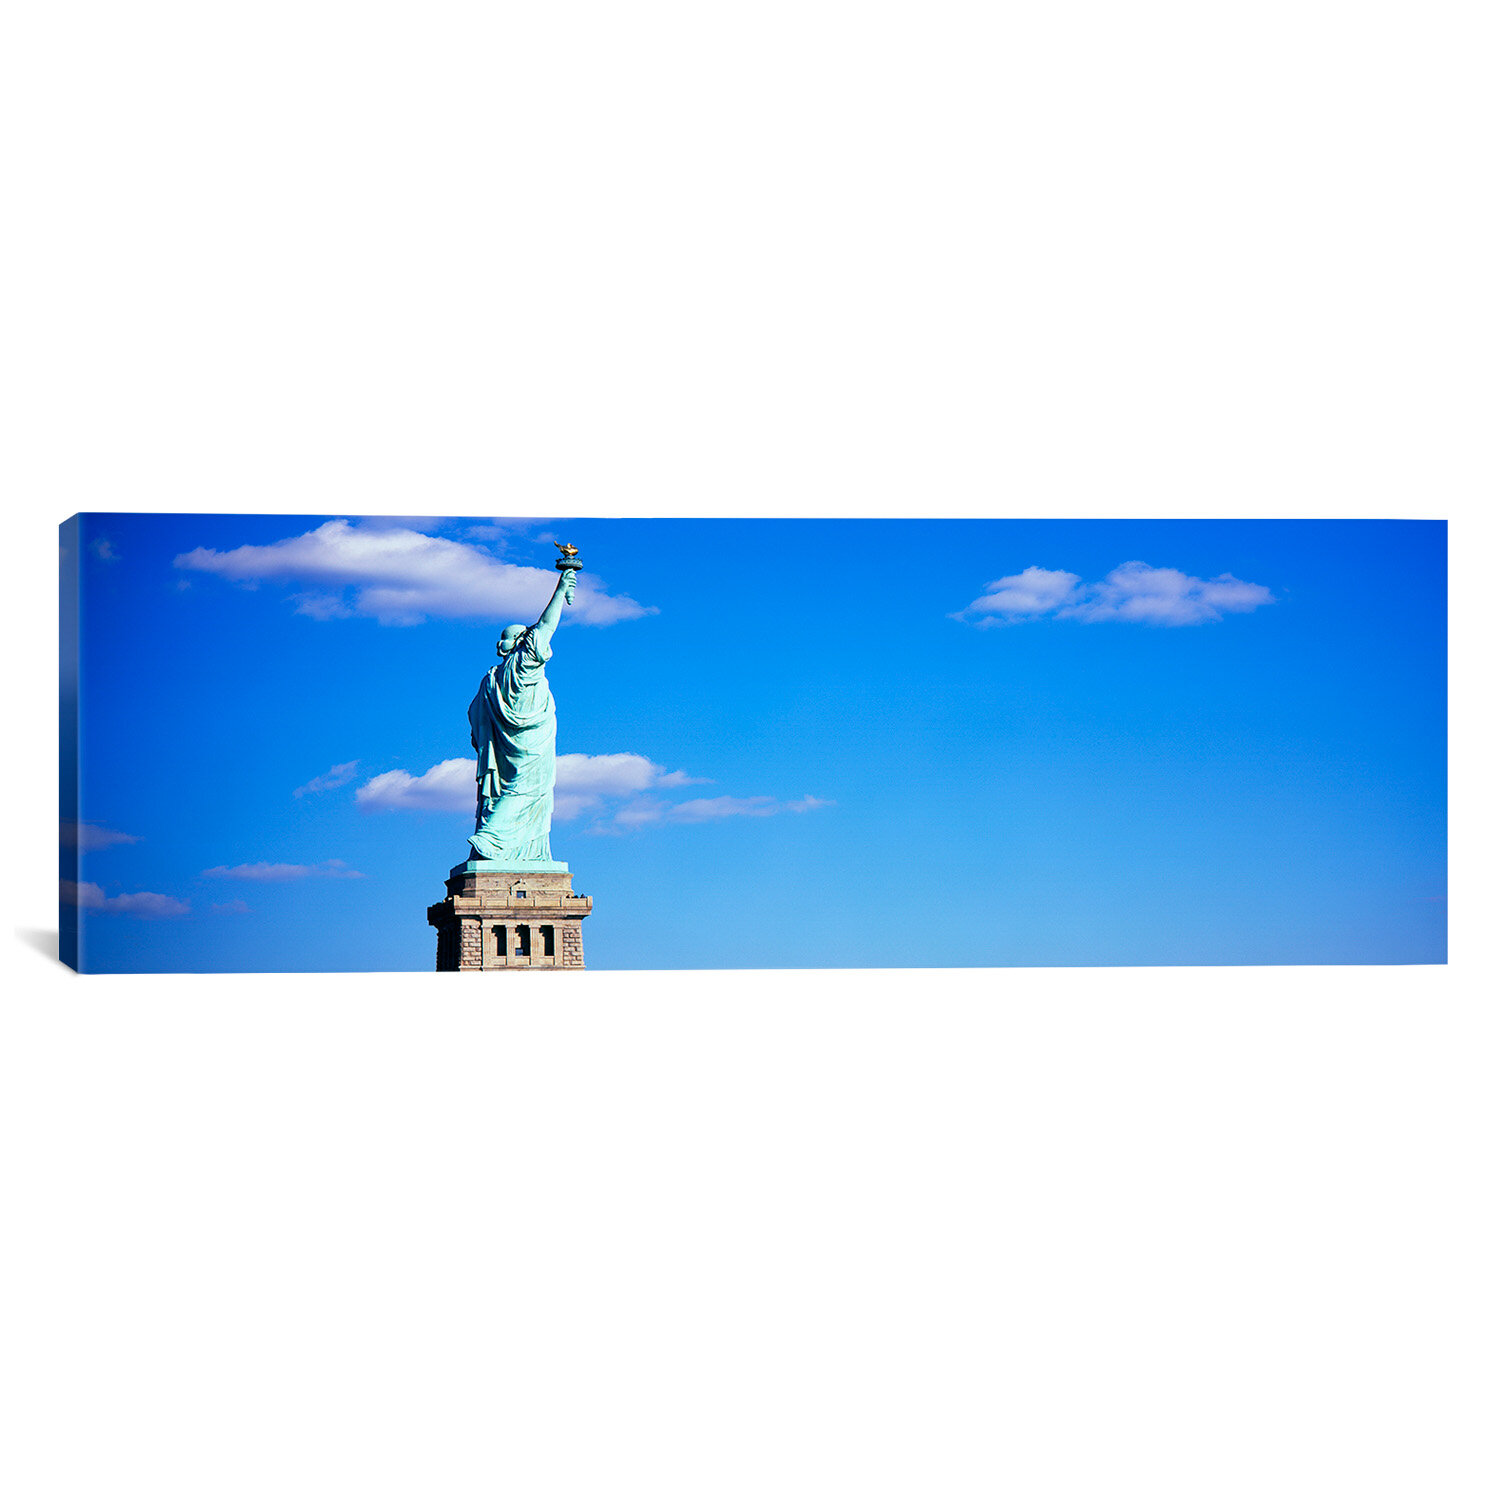 Statue of Liberty, as viewed from Liberty State Park. - Picture of